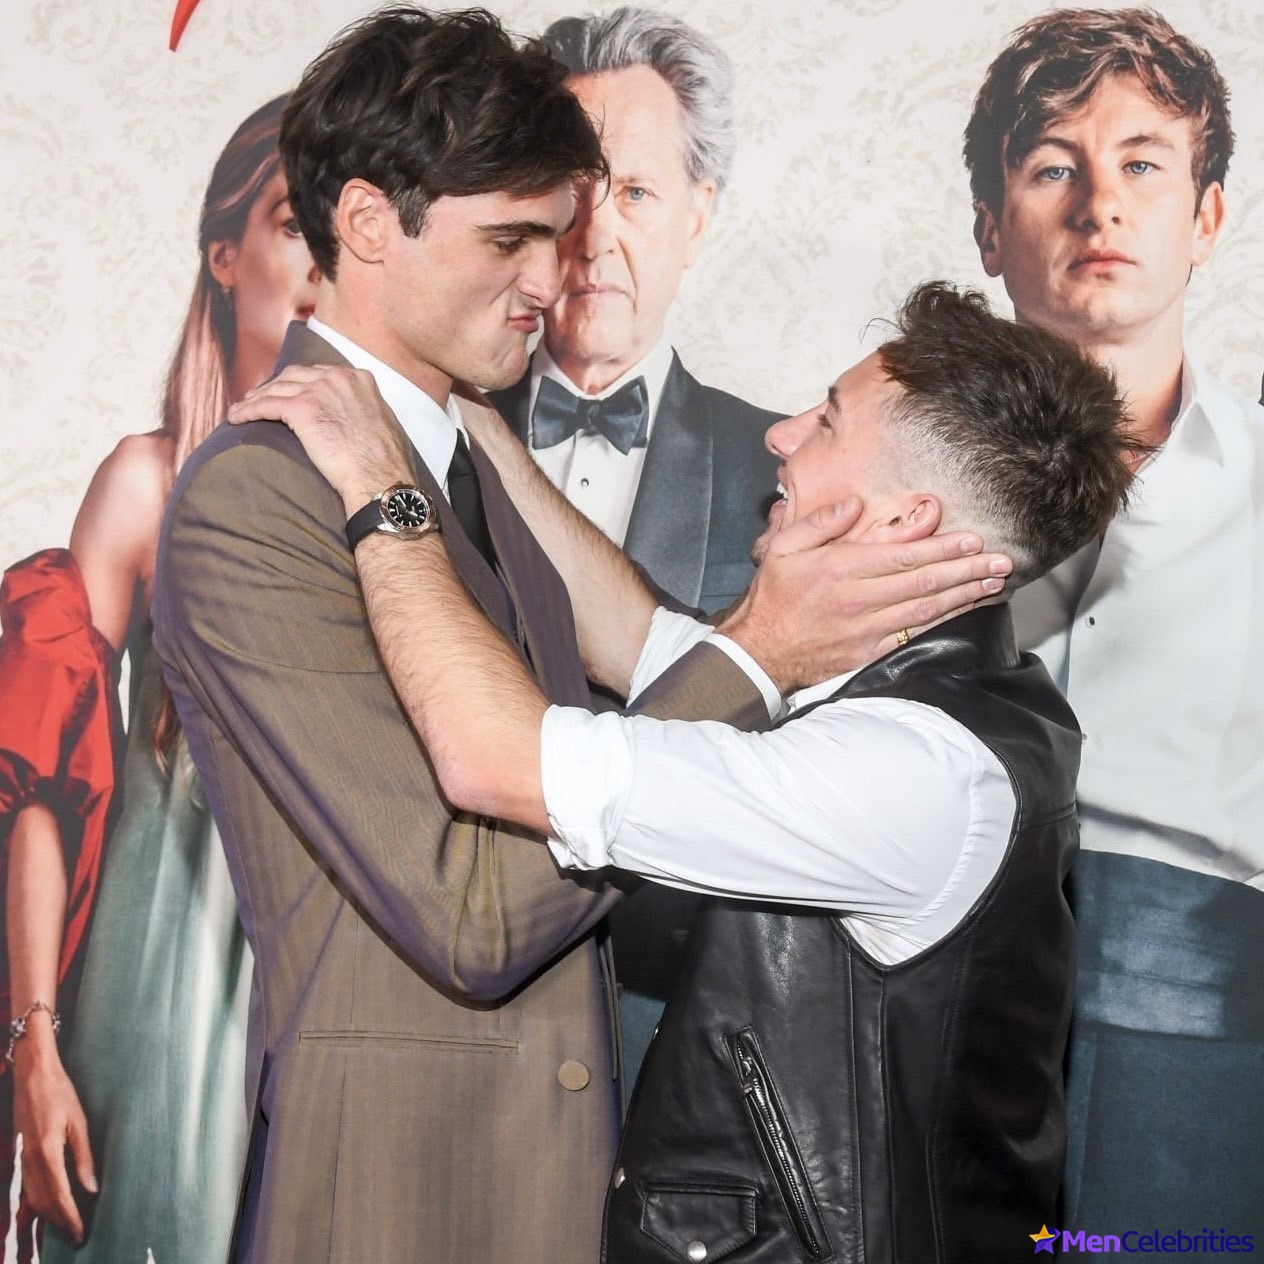 ‘Saltburn’ Director Discusses Barry Keoghan’s Full-Frontal Nude Scene